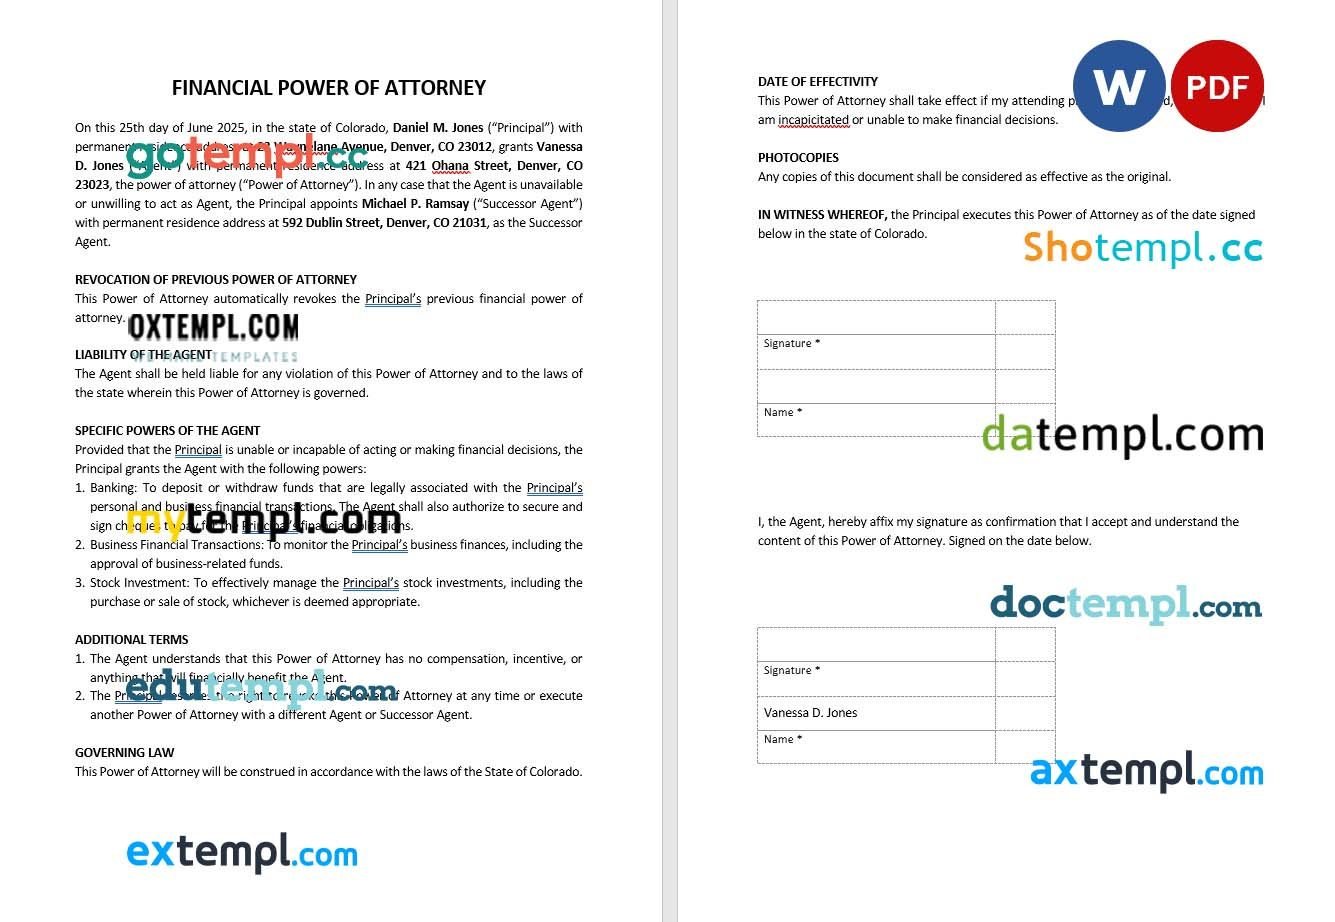 Financial Power of Attorney Form example, fully editable